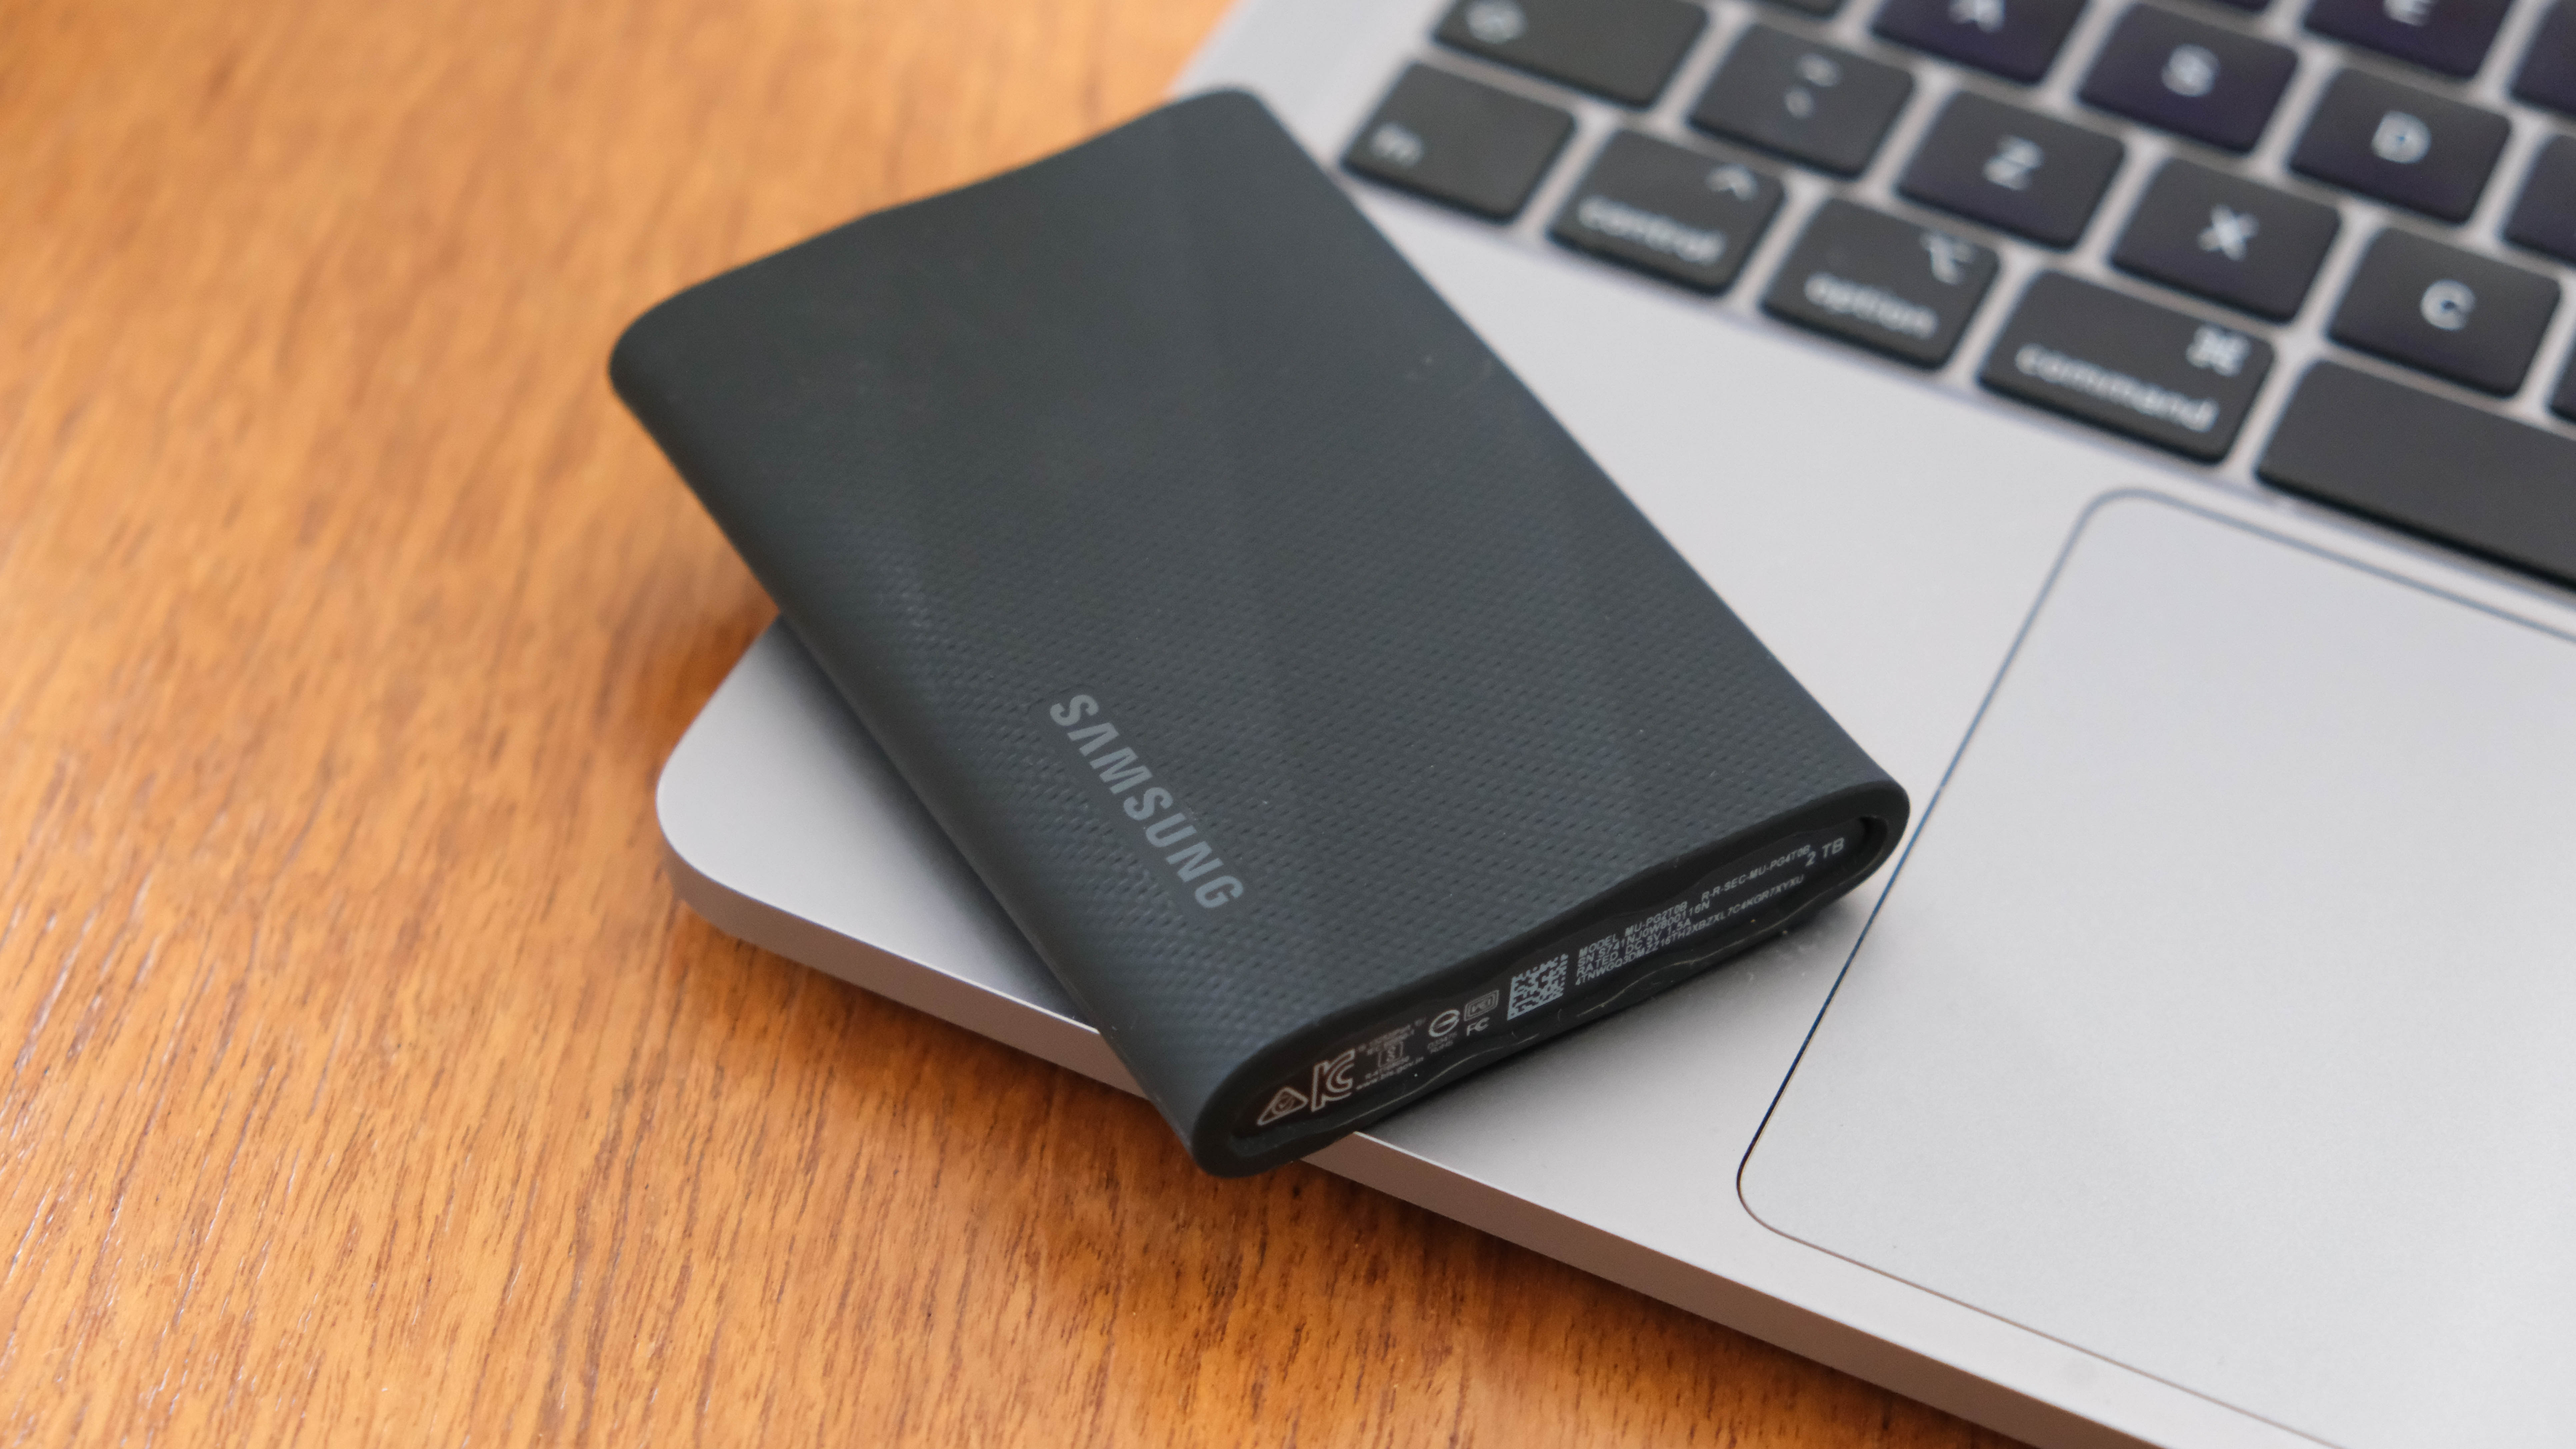 USB 3.2 Gen 2 Portable SSDs Roundup - Featuring the Samsung T7 Touch and  the SanDisk Extreme Pro